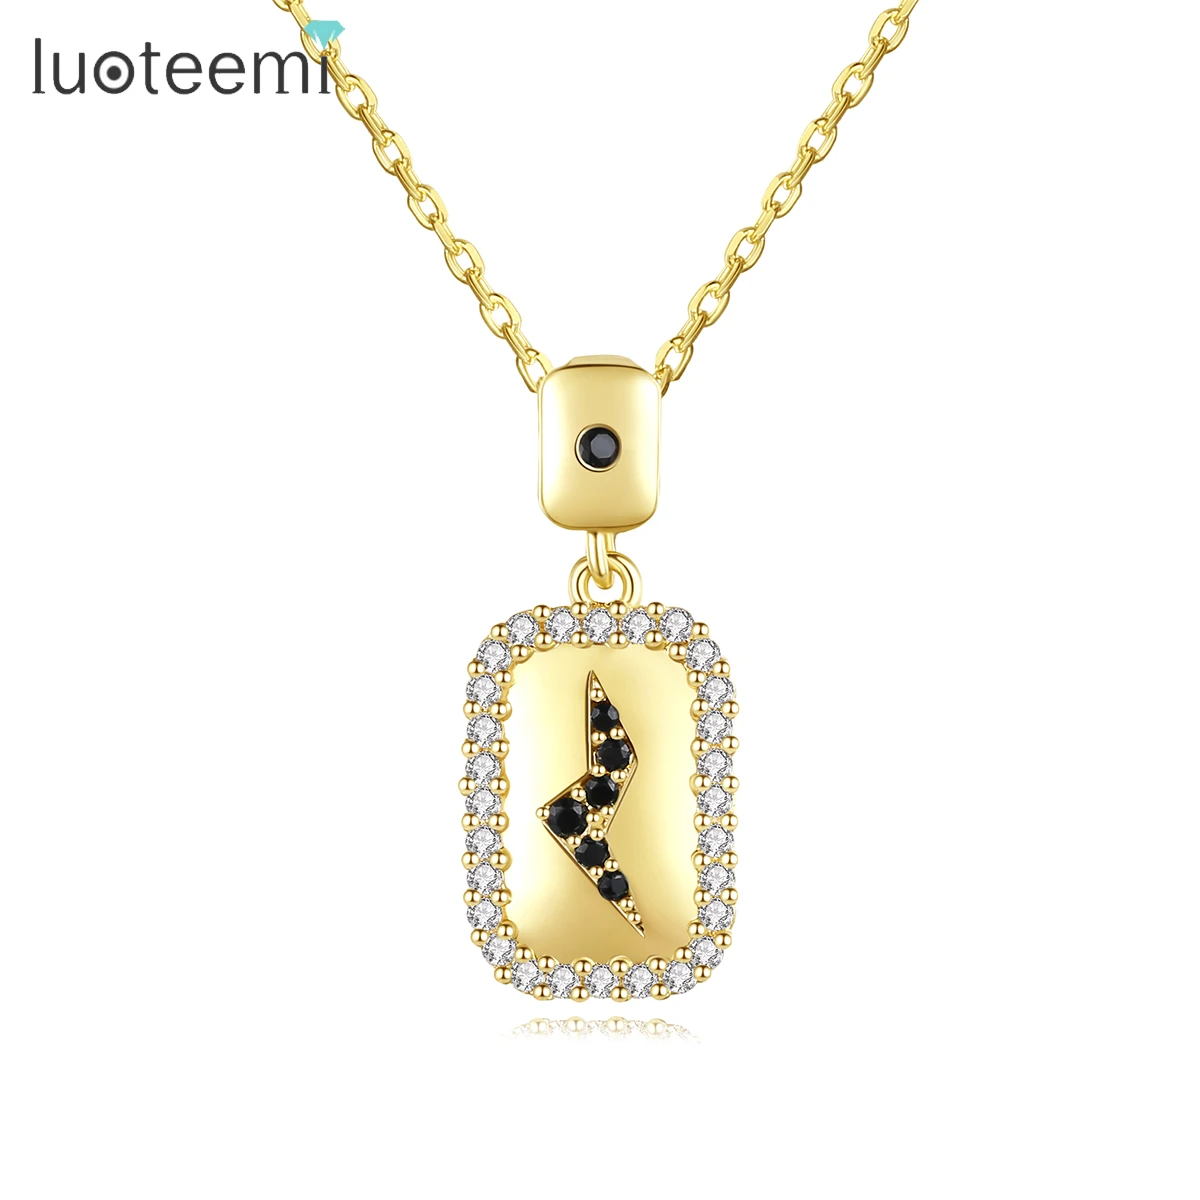 

LUOTEEMI 2020 New Arrival Pendant Necklace Classic Design Jewelry for Women Shining Cubic Zircon Paved Long Link Chain Necklace